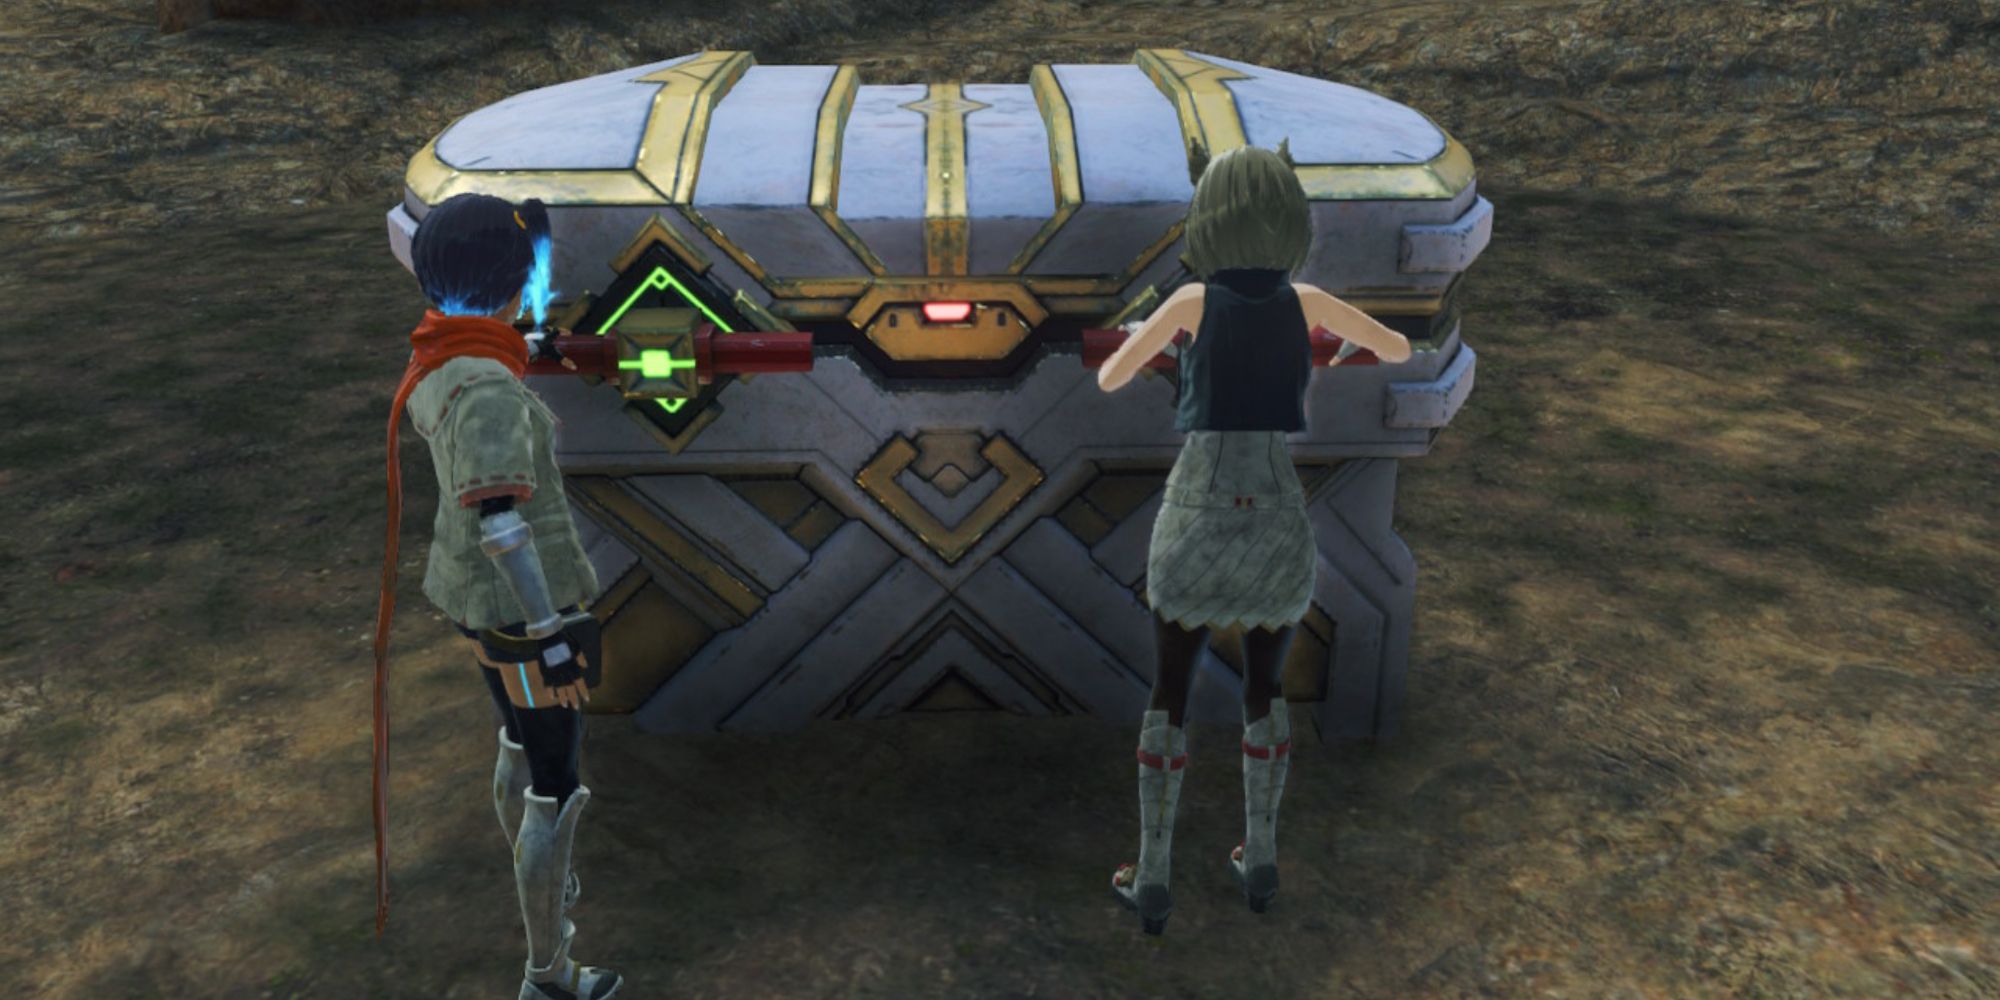 Sena and Mio opening a Supply Crate in Xenoblade Chronicles 3